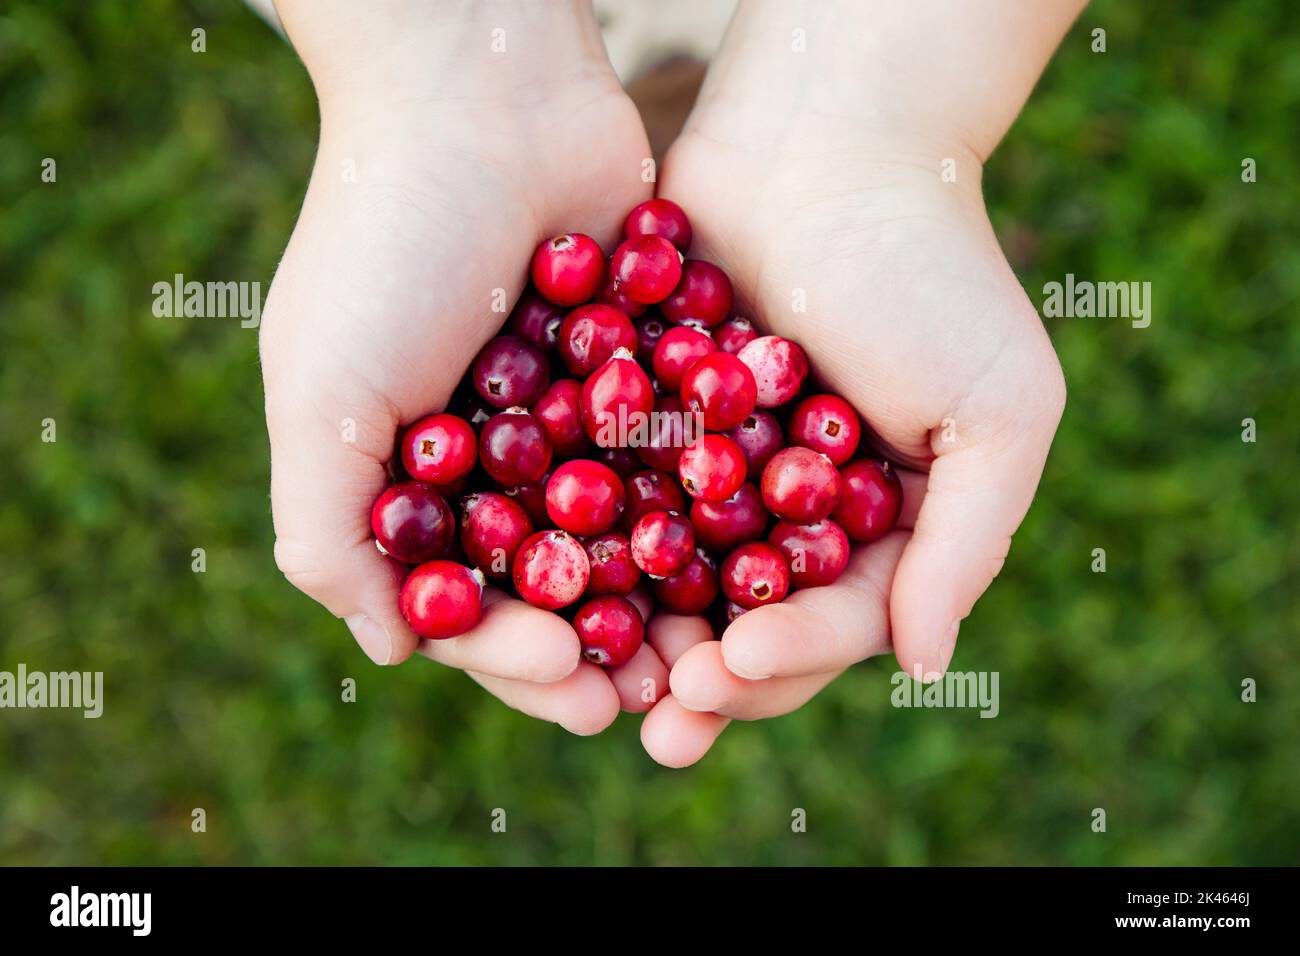 Above view of child hands holding pile of fresh red cranberries known as Vaccinium oxycoccos or marshberry picked from marsh. Healthy snack. Stock Photo